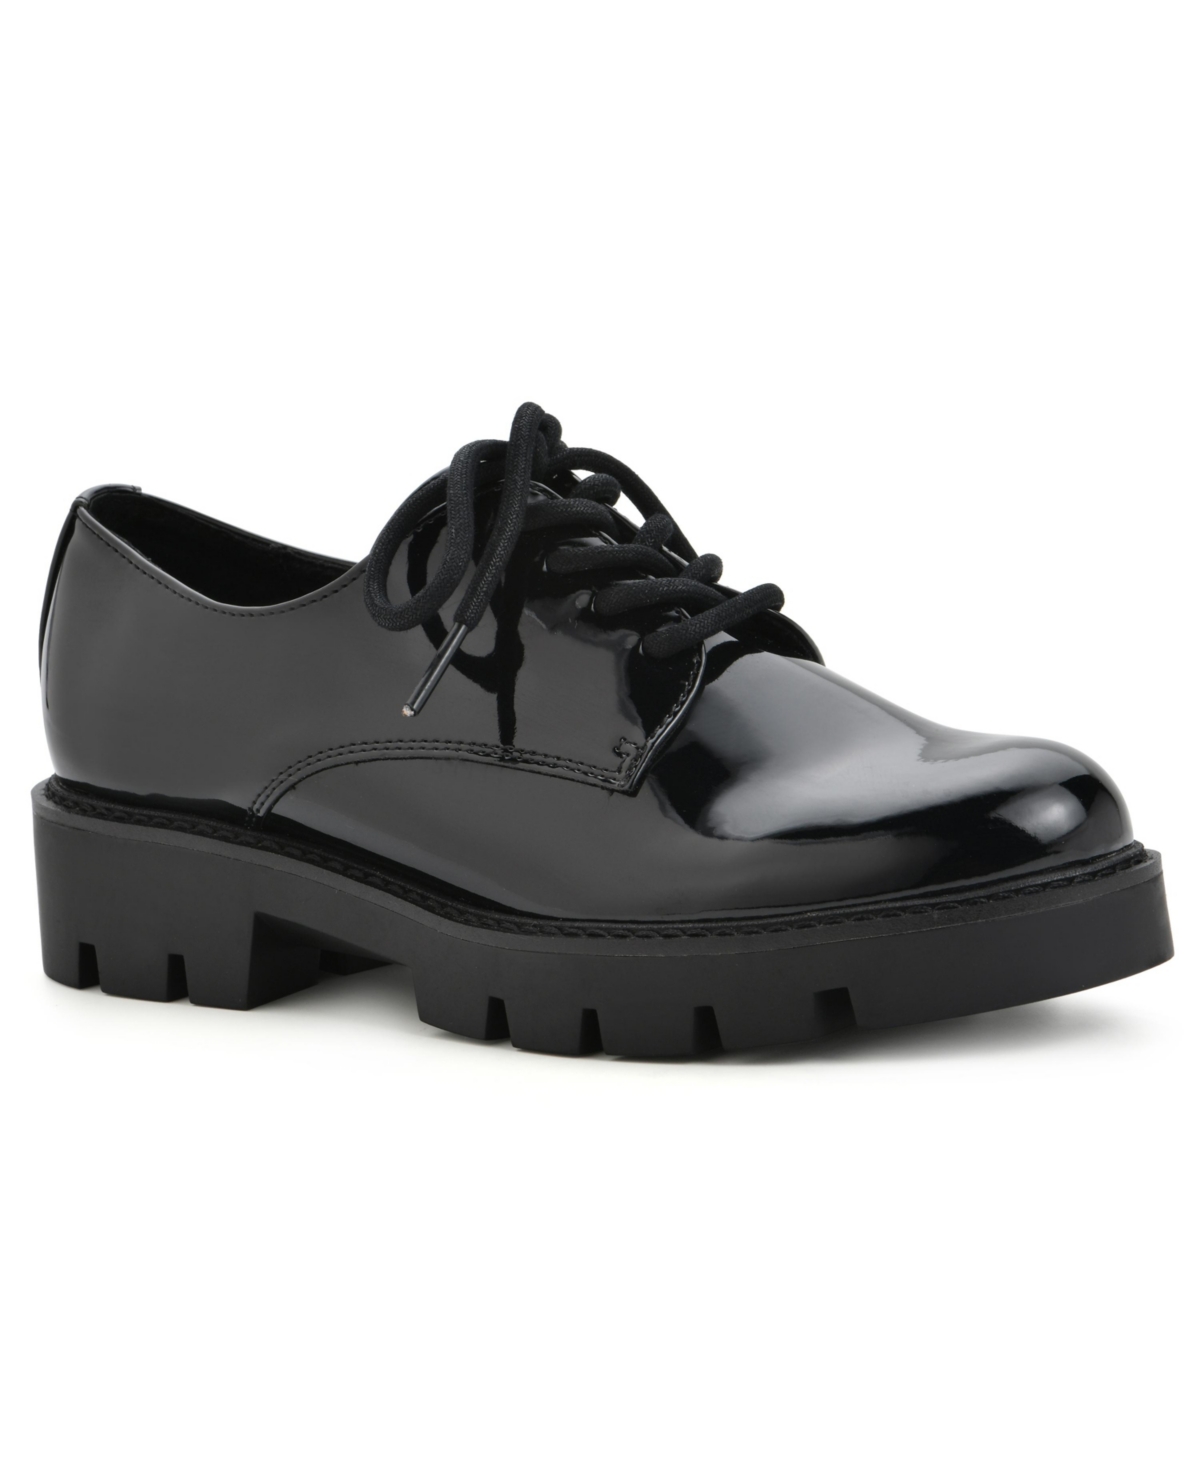 Women's Gleesome Lug Sole Oxford Loafers - Black Patent